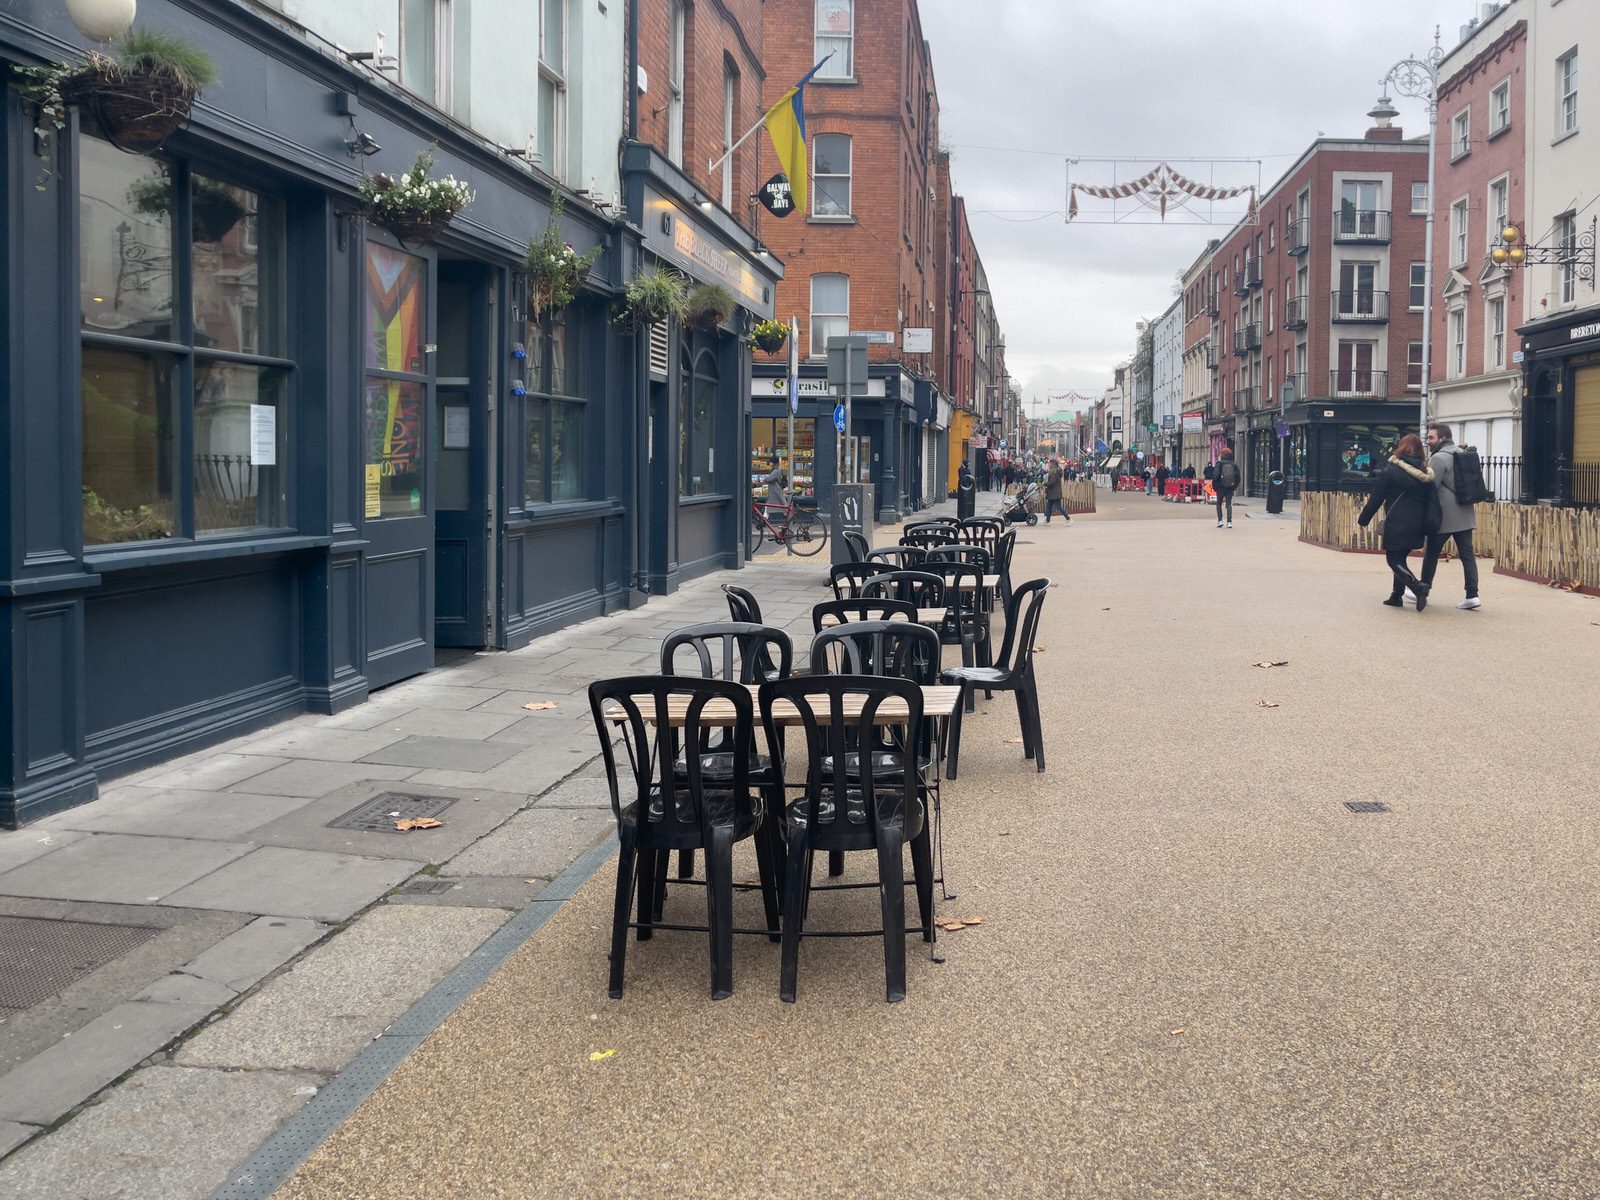 THE NEW STREET FURNITURE IS BEING INSTALLED ON CAPEL STREET [BUT THERE ARE FEW VISITORS TO BE SEEN TODAY]-225419-1